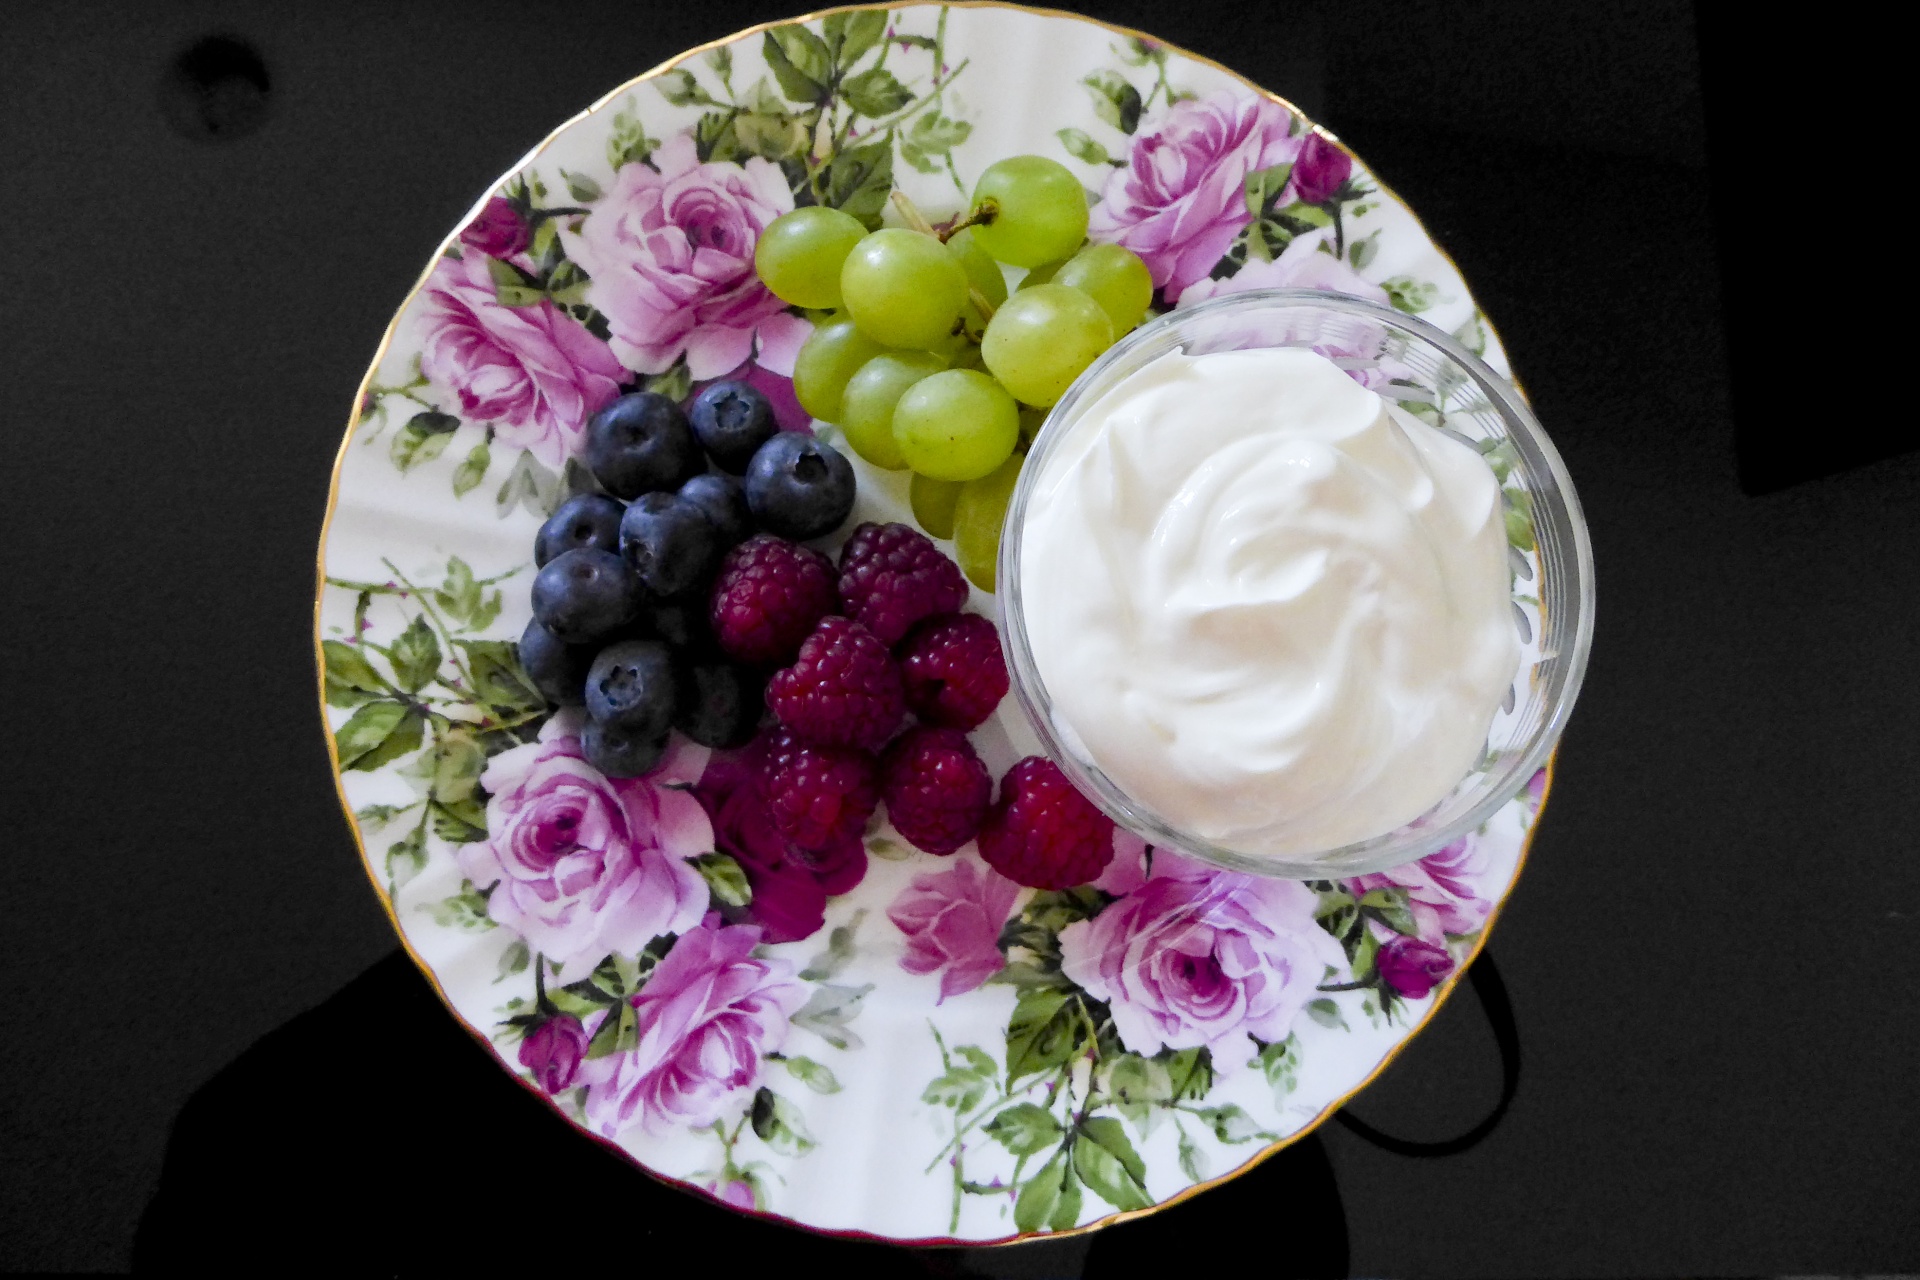 Floral Plate Of Fruit